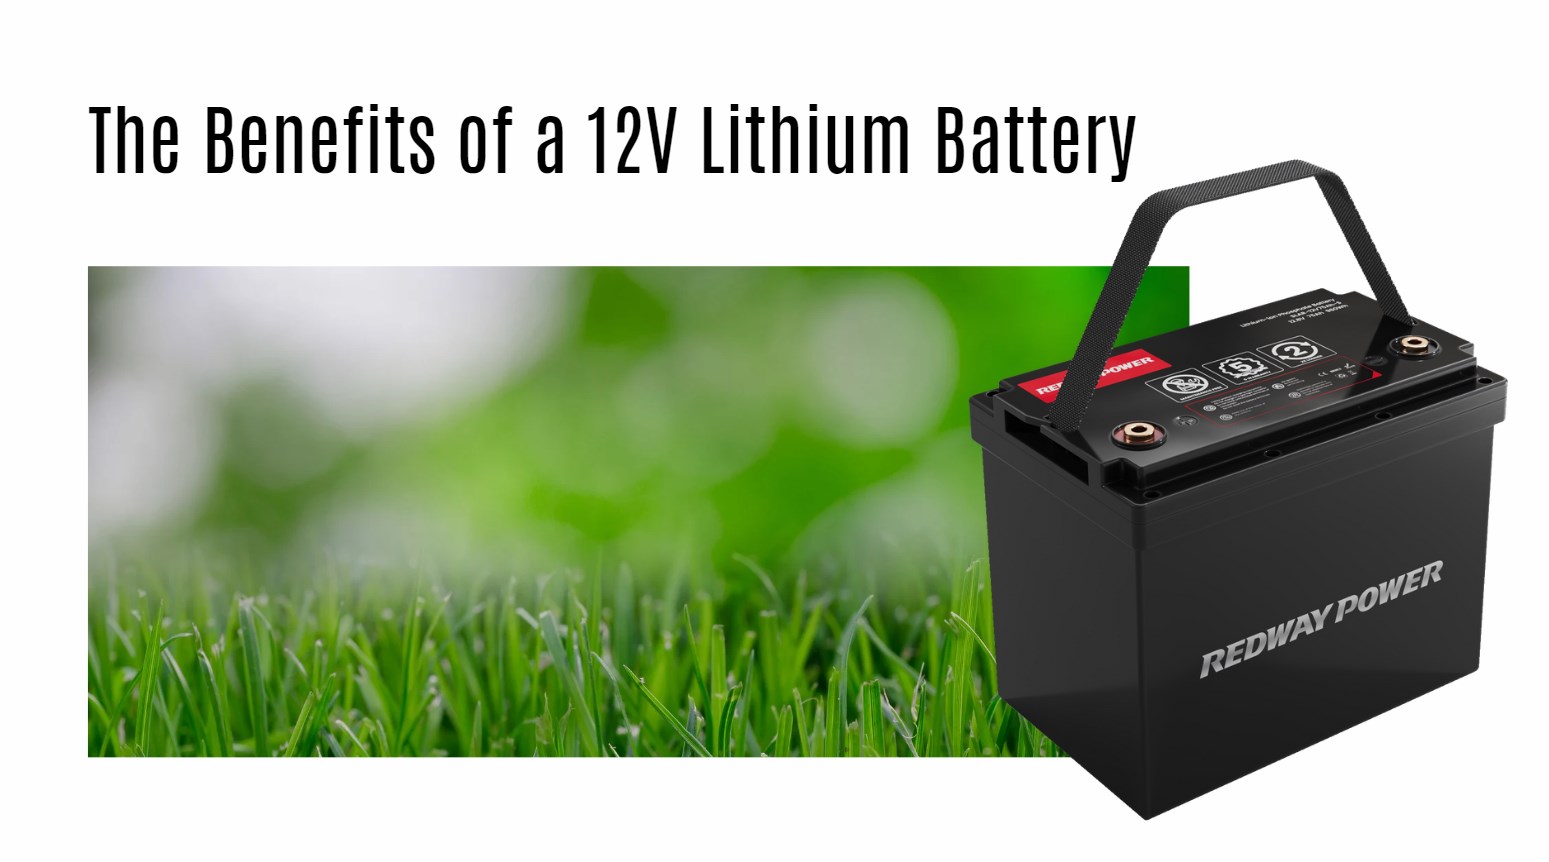 The Benefits of a 12 Volt Lithium Battery. 12v 100ah rv lithium battery factory oem manufacturer